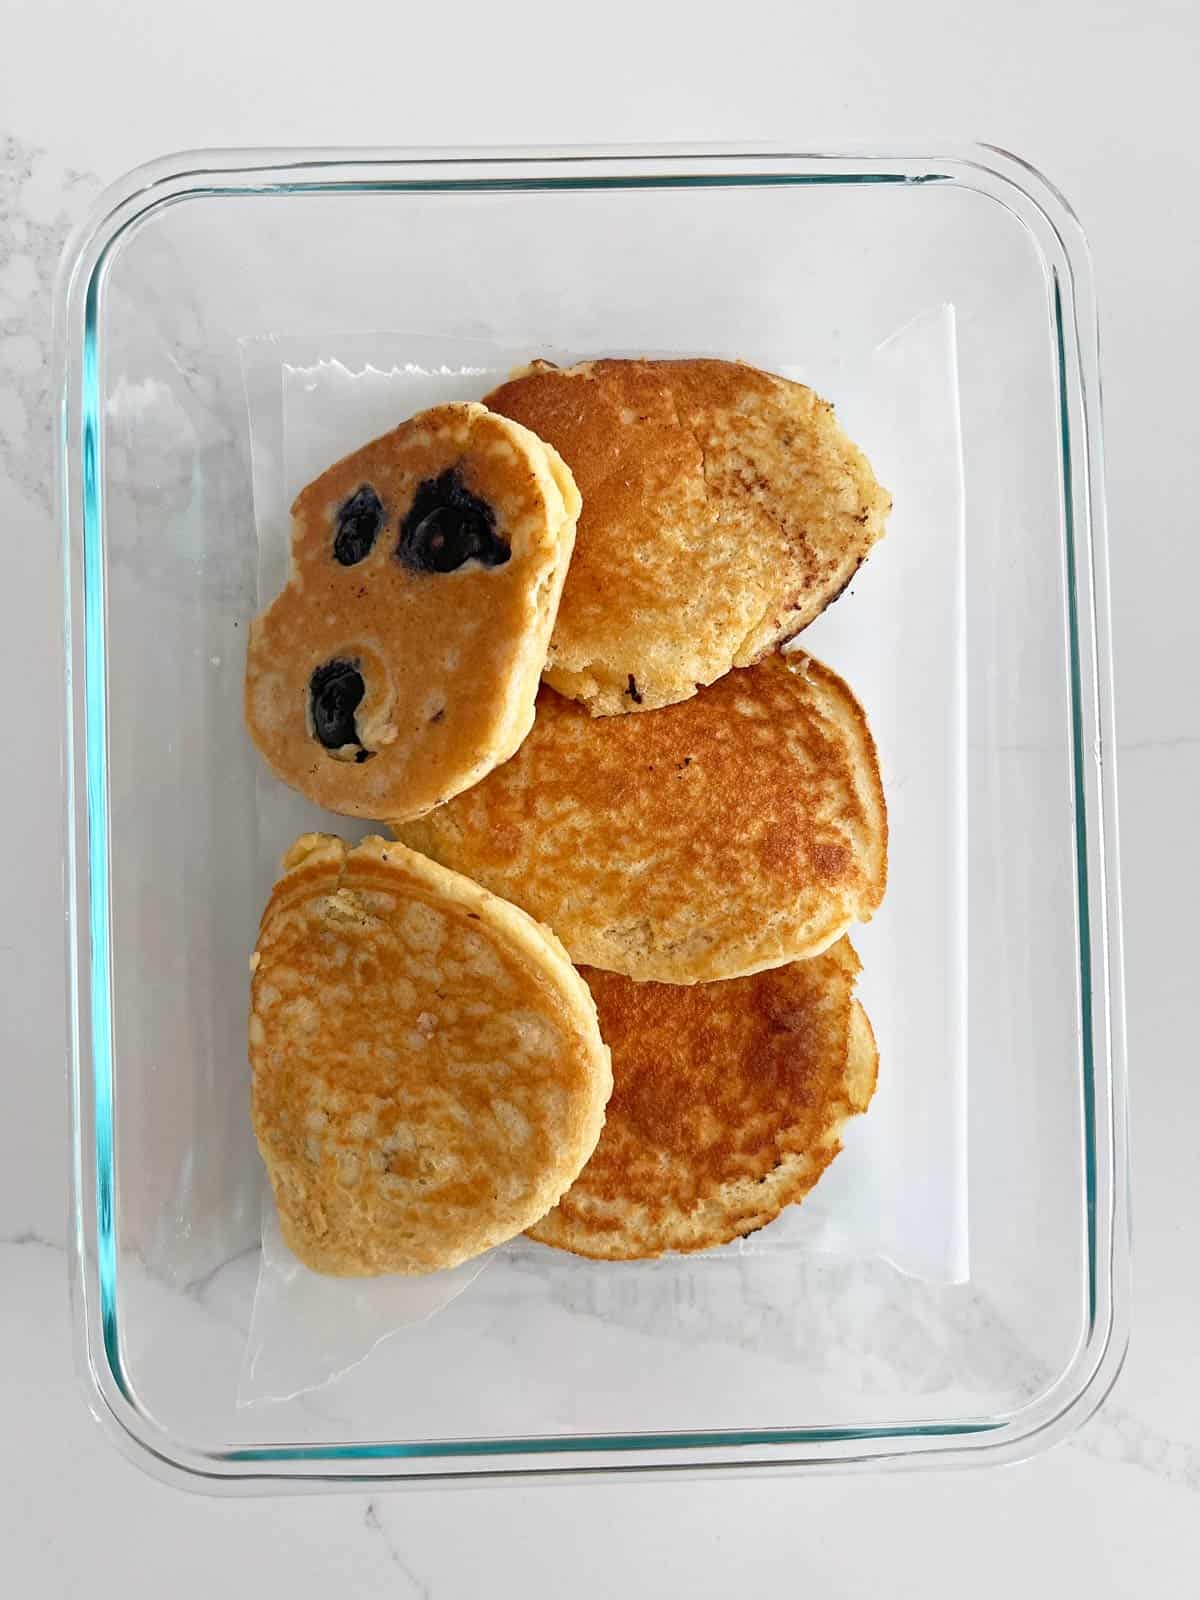 Almond flour pancakes are stored in a food storage container.